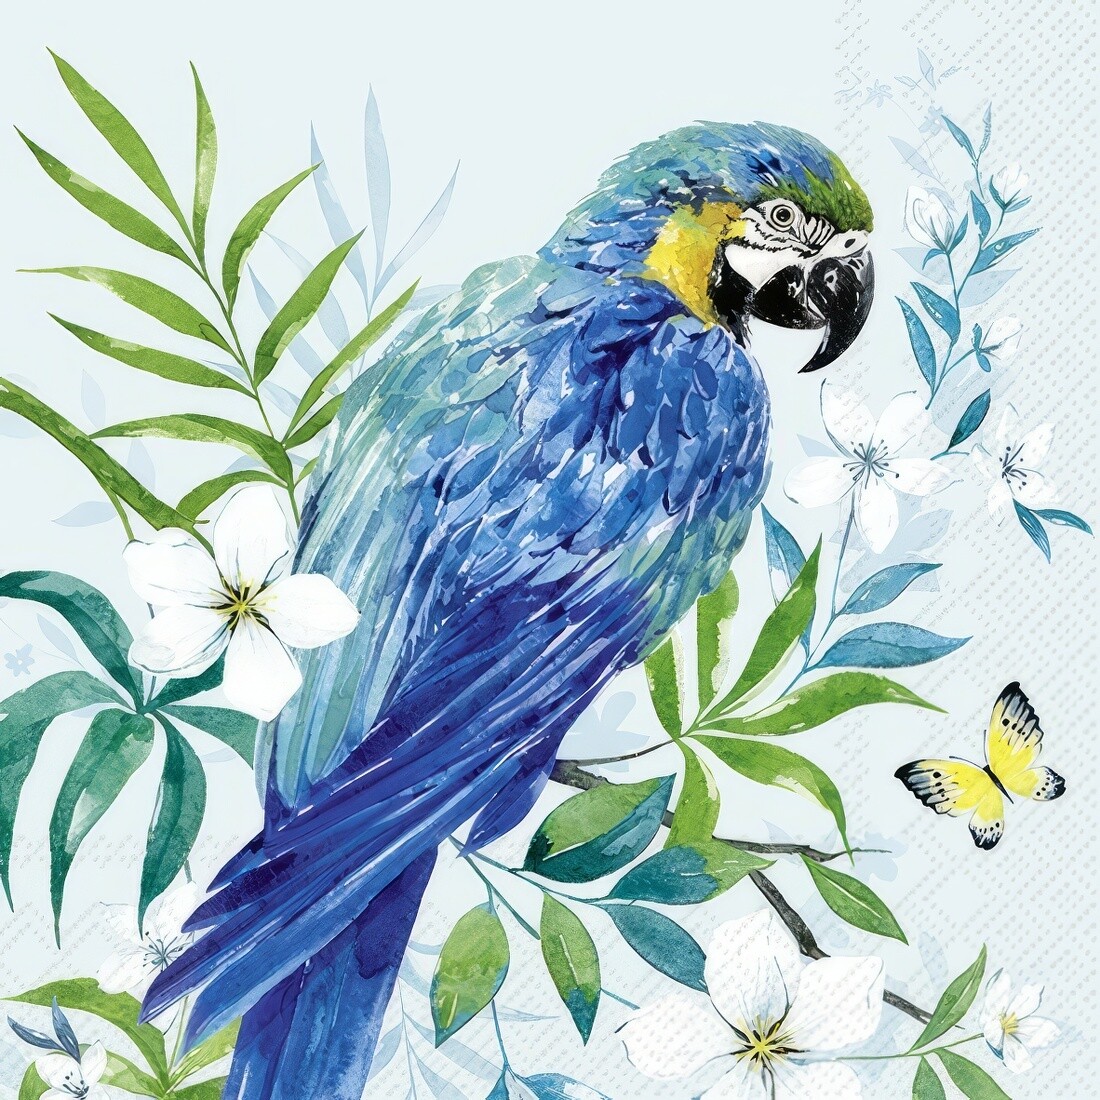 Decoupage Paper Napkins - Bird - Parrot Light Blue
The Decoupage tissue paper showcases a stunning illustration of a majestic blue and yellow macaw perched among lush tropical foliage. The bird is depicted with intricate details, capturing its vibrant plumage and expressive features. Surrounding the macaw are delicate white flowers and verdant leaves, creating a lush and exotic backdrop. A graceful butterfly flutters nearby, adding to the sense of natural beauty and tranquility. The soft blue background enhances the tropical theme of the design, making it ideal for decorative crafts and artistic projects with a tropical or wildlife-inspired theme.